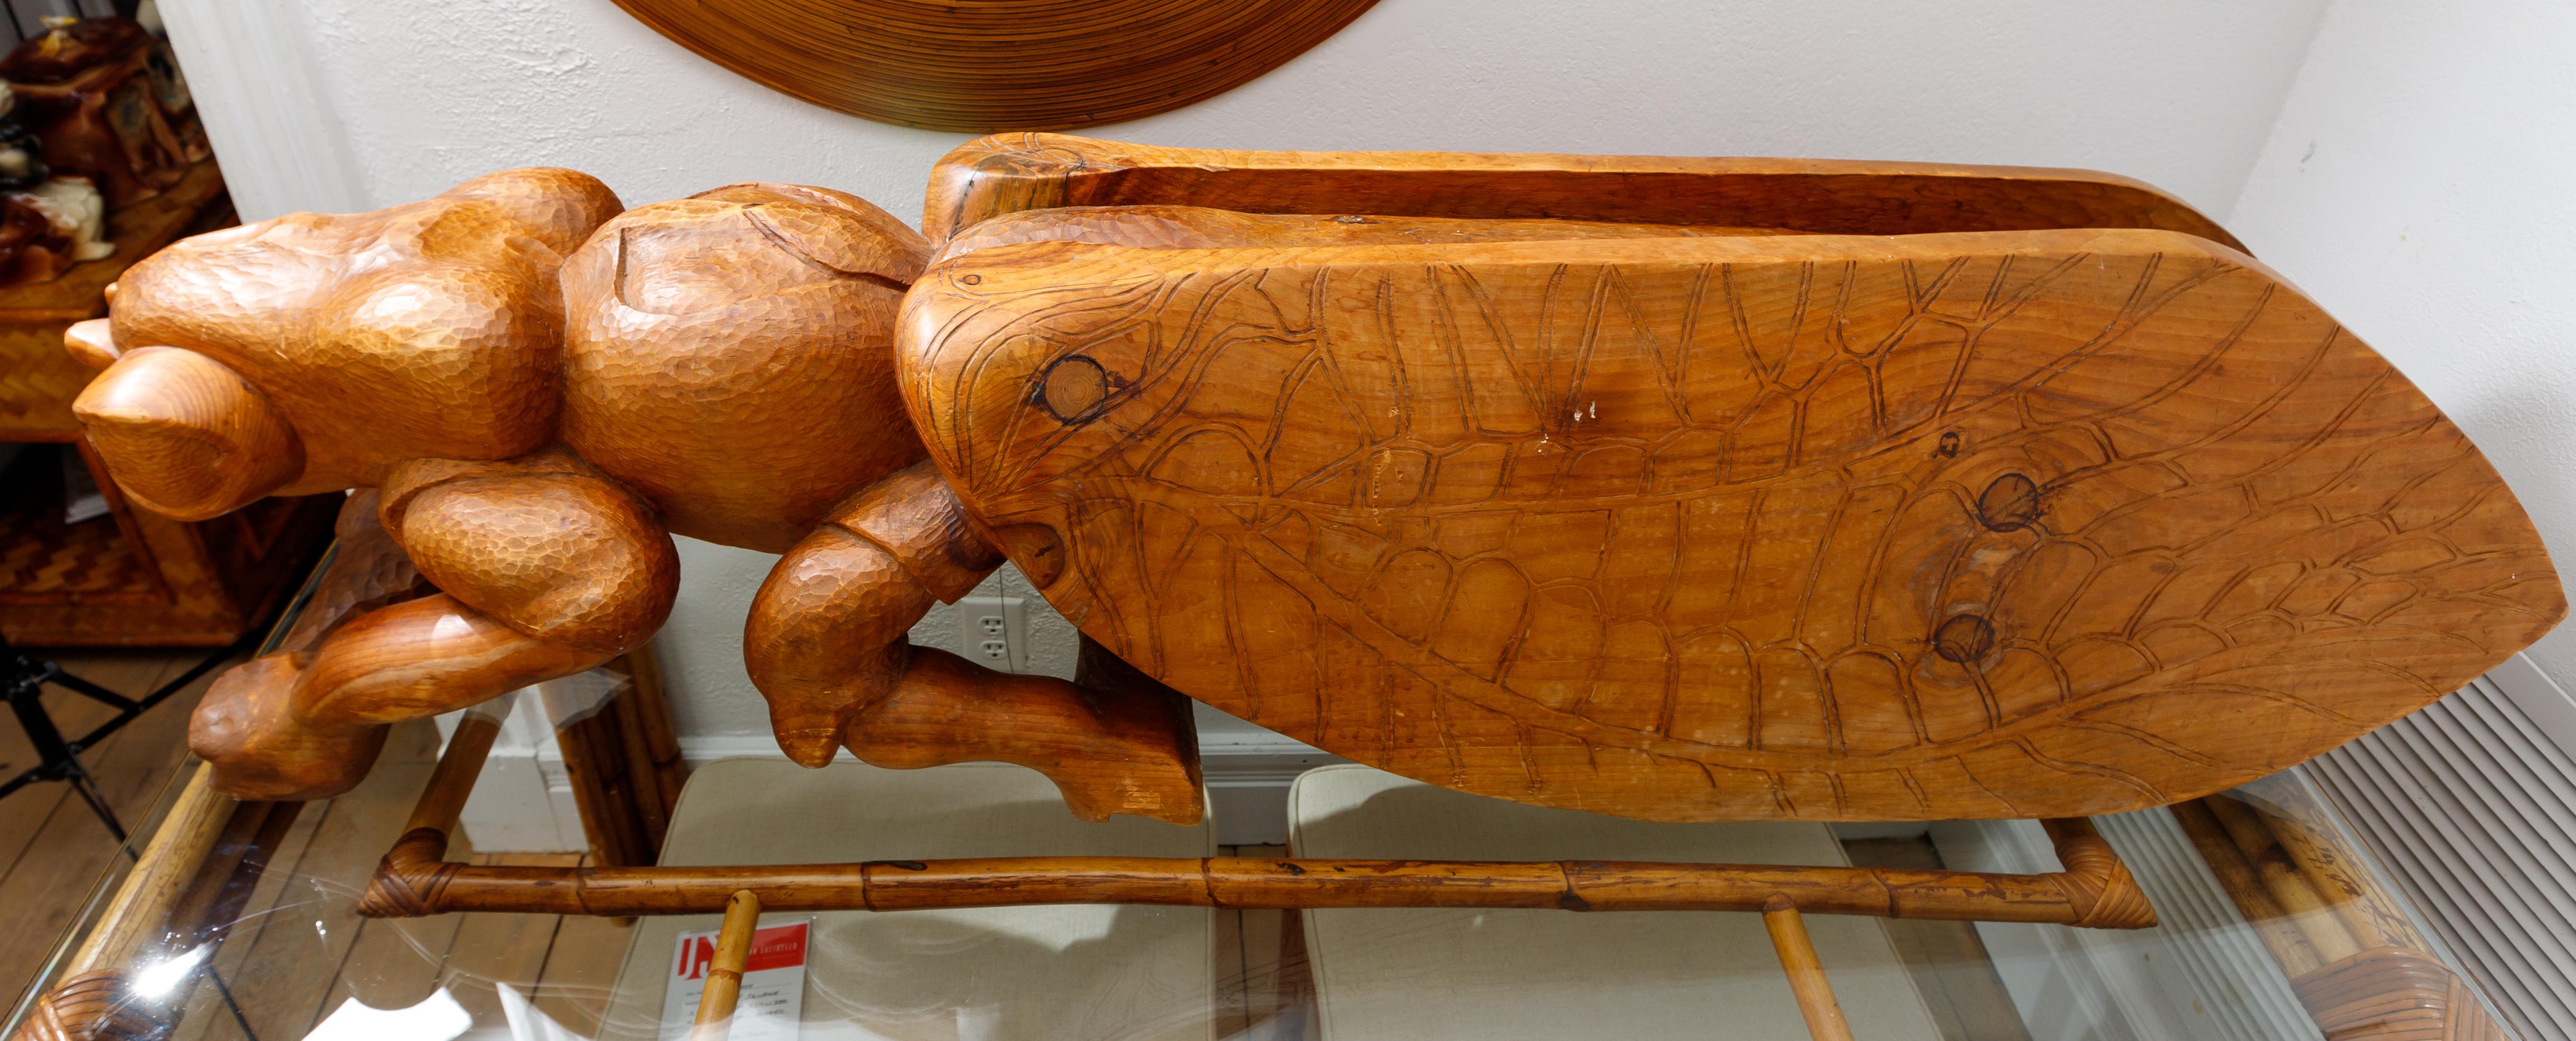 Solid tropical hard wood sculpture in the Form of a Locust/Cicada.